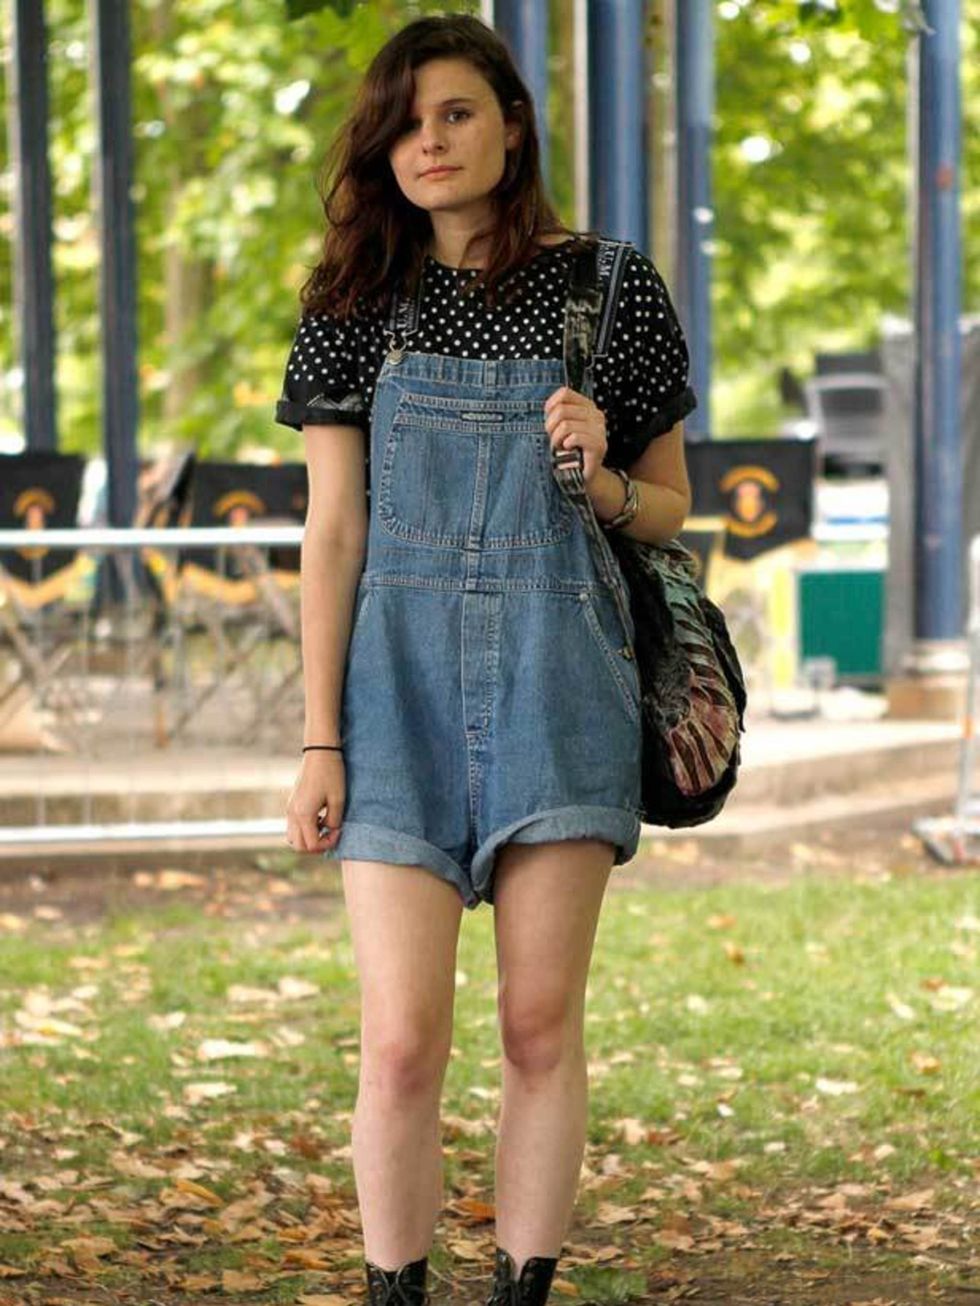 <p>Photo by Anthea Simms.Fabienne, 18, Student. Urban Outfitters dungarees, Dr Marten boots, backpack from Camden market.</p>